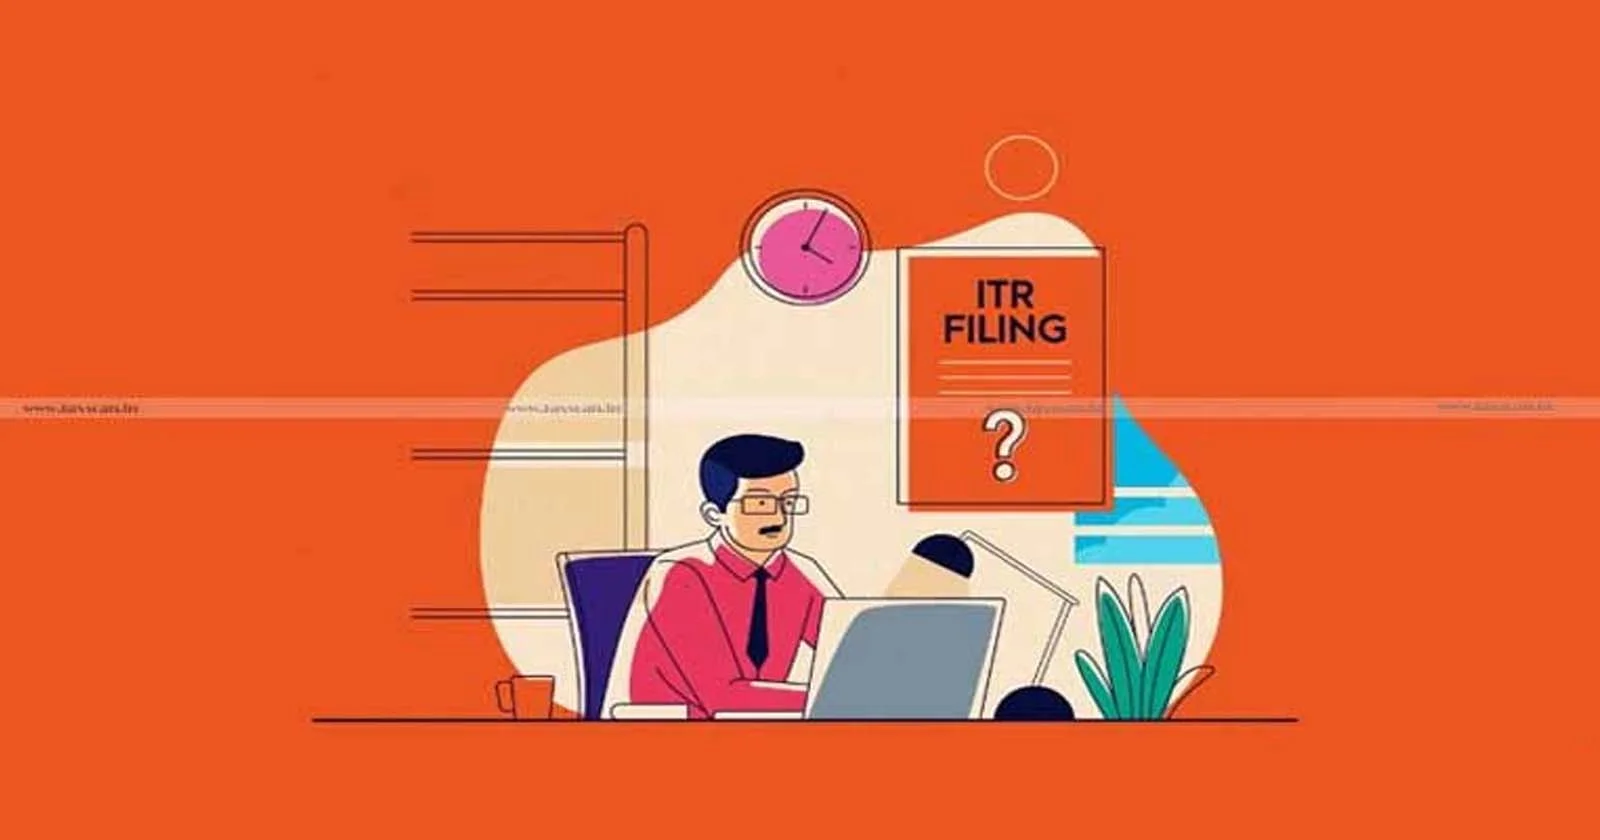 Filing ITR - Guide to Verify Salary Details, Form 16 and Tax Liability - ITR - Income Tax Return - ITR - taxscan